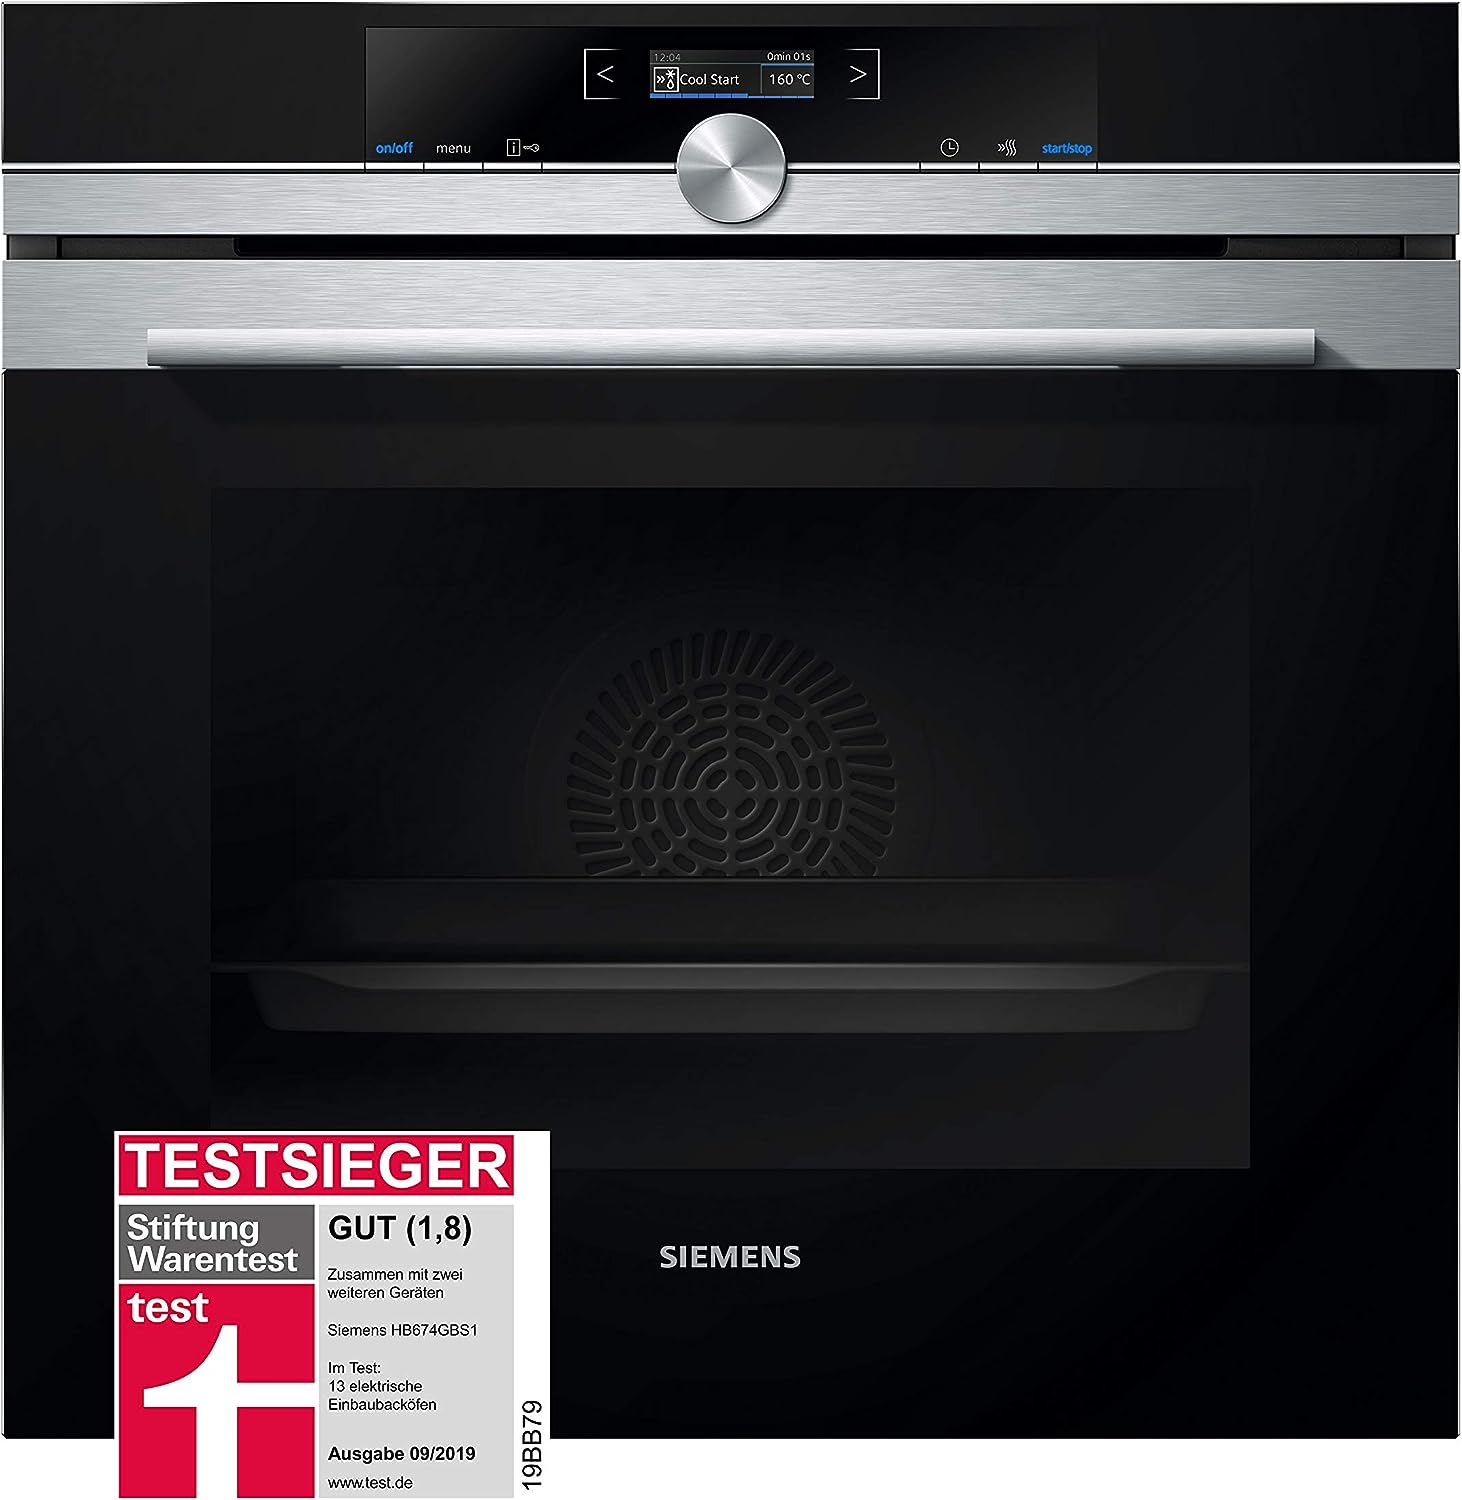 Siemens HB674GBS1 iQ700 Built-In Electric Oven / Stainless Steel / A+ / activeClean Automatic Self-Cleaning / coolStart - No Preheating / Oven Door with SoftMove for Dampened Opening and Closing